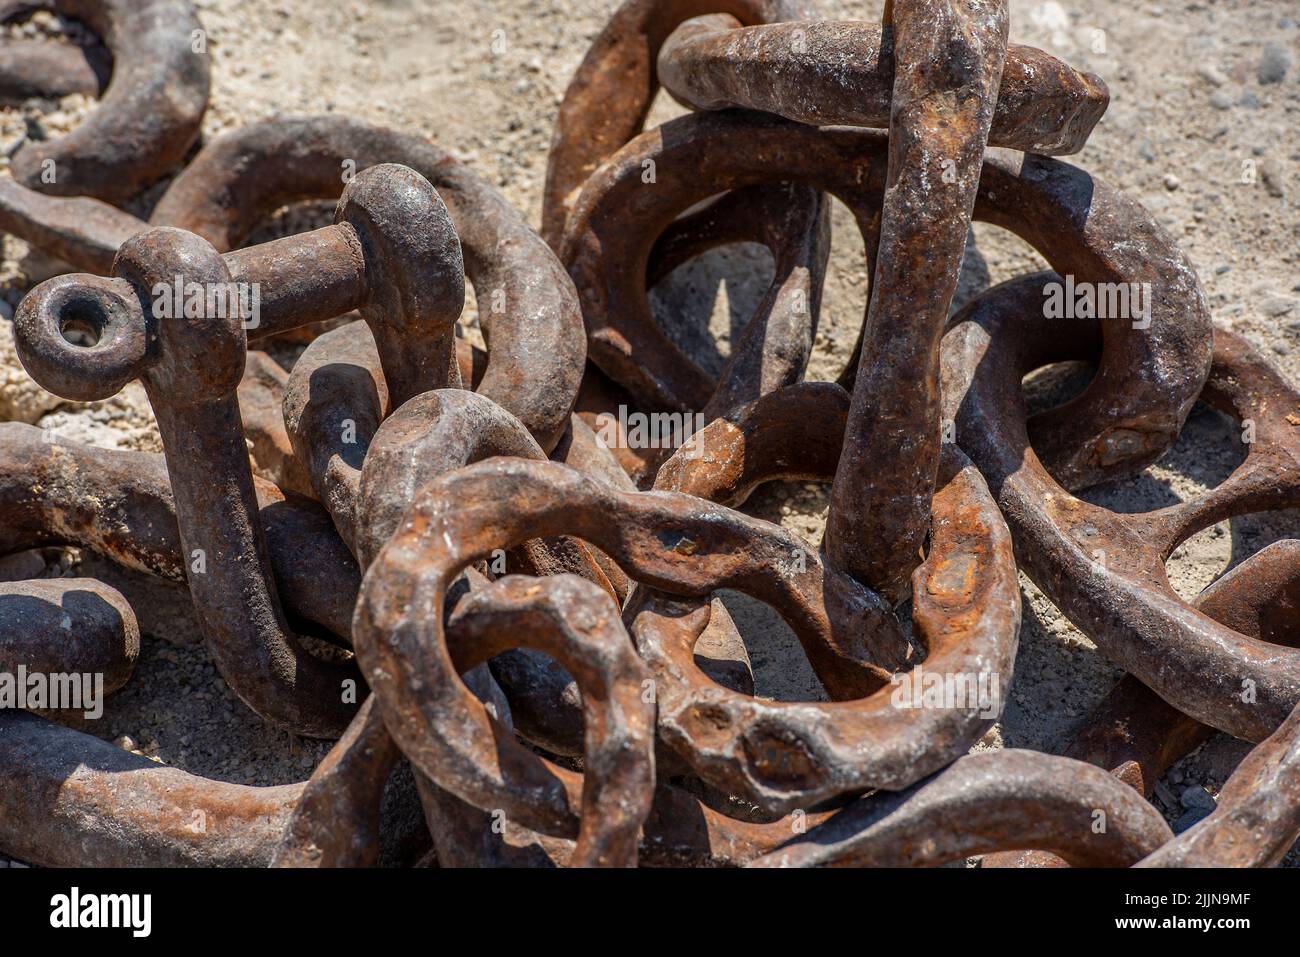 pile of rusty old chains, corroded old chains, shackles and chains on quayside, corrosion and rust on old chain links and shackles on the dockside. Stock Photo